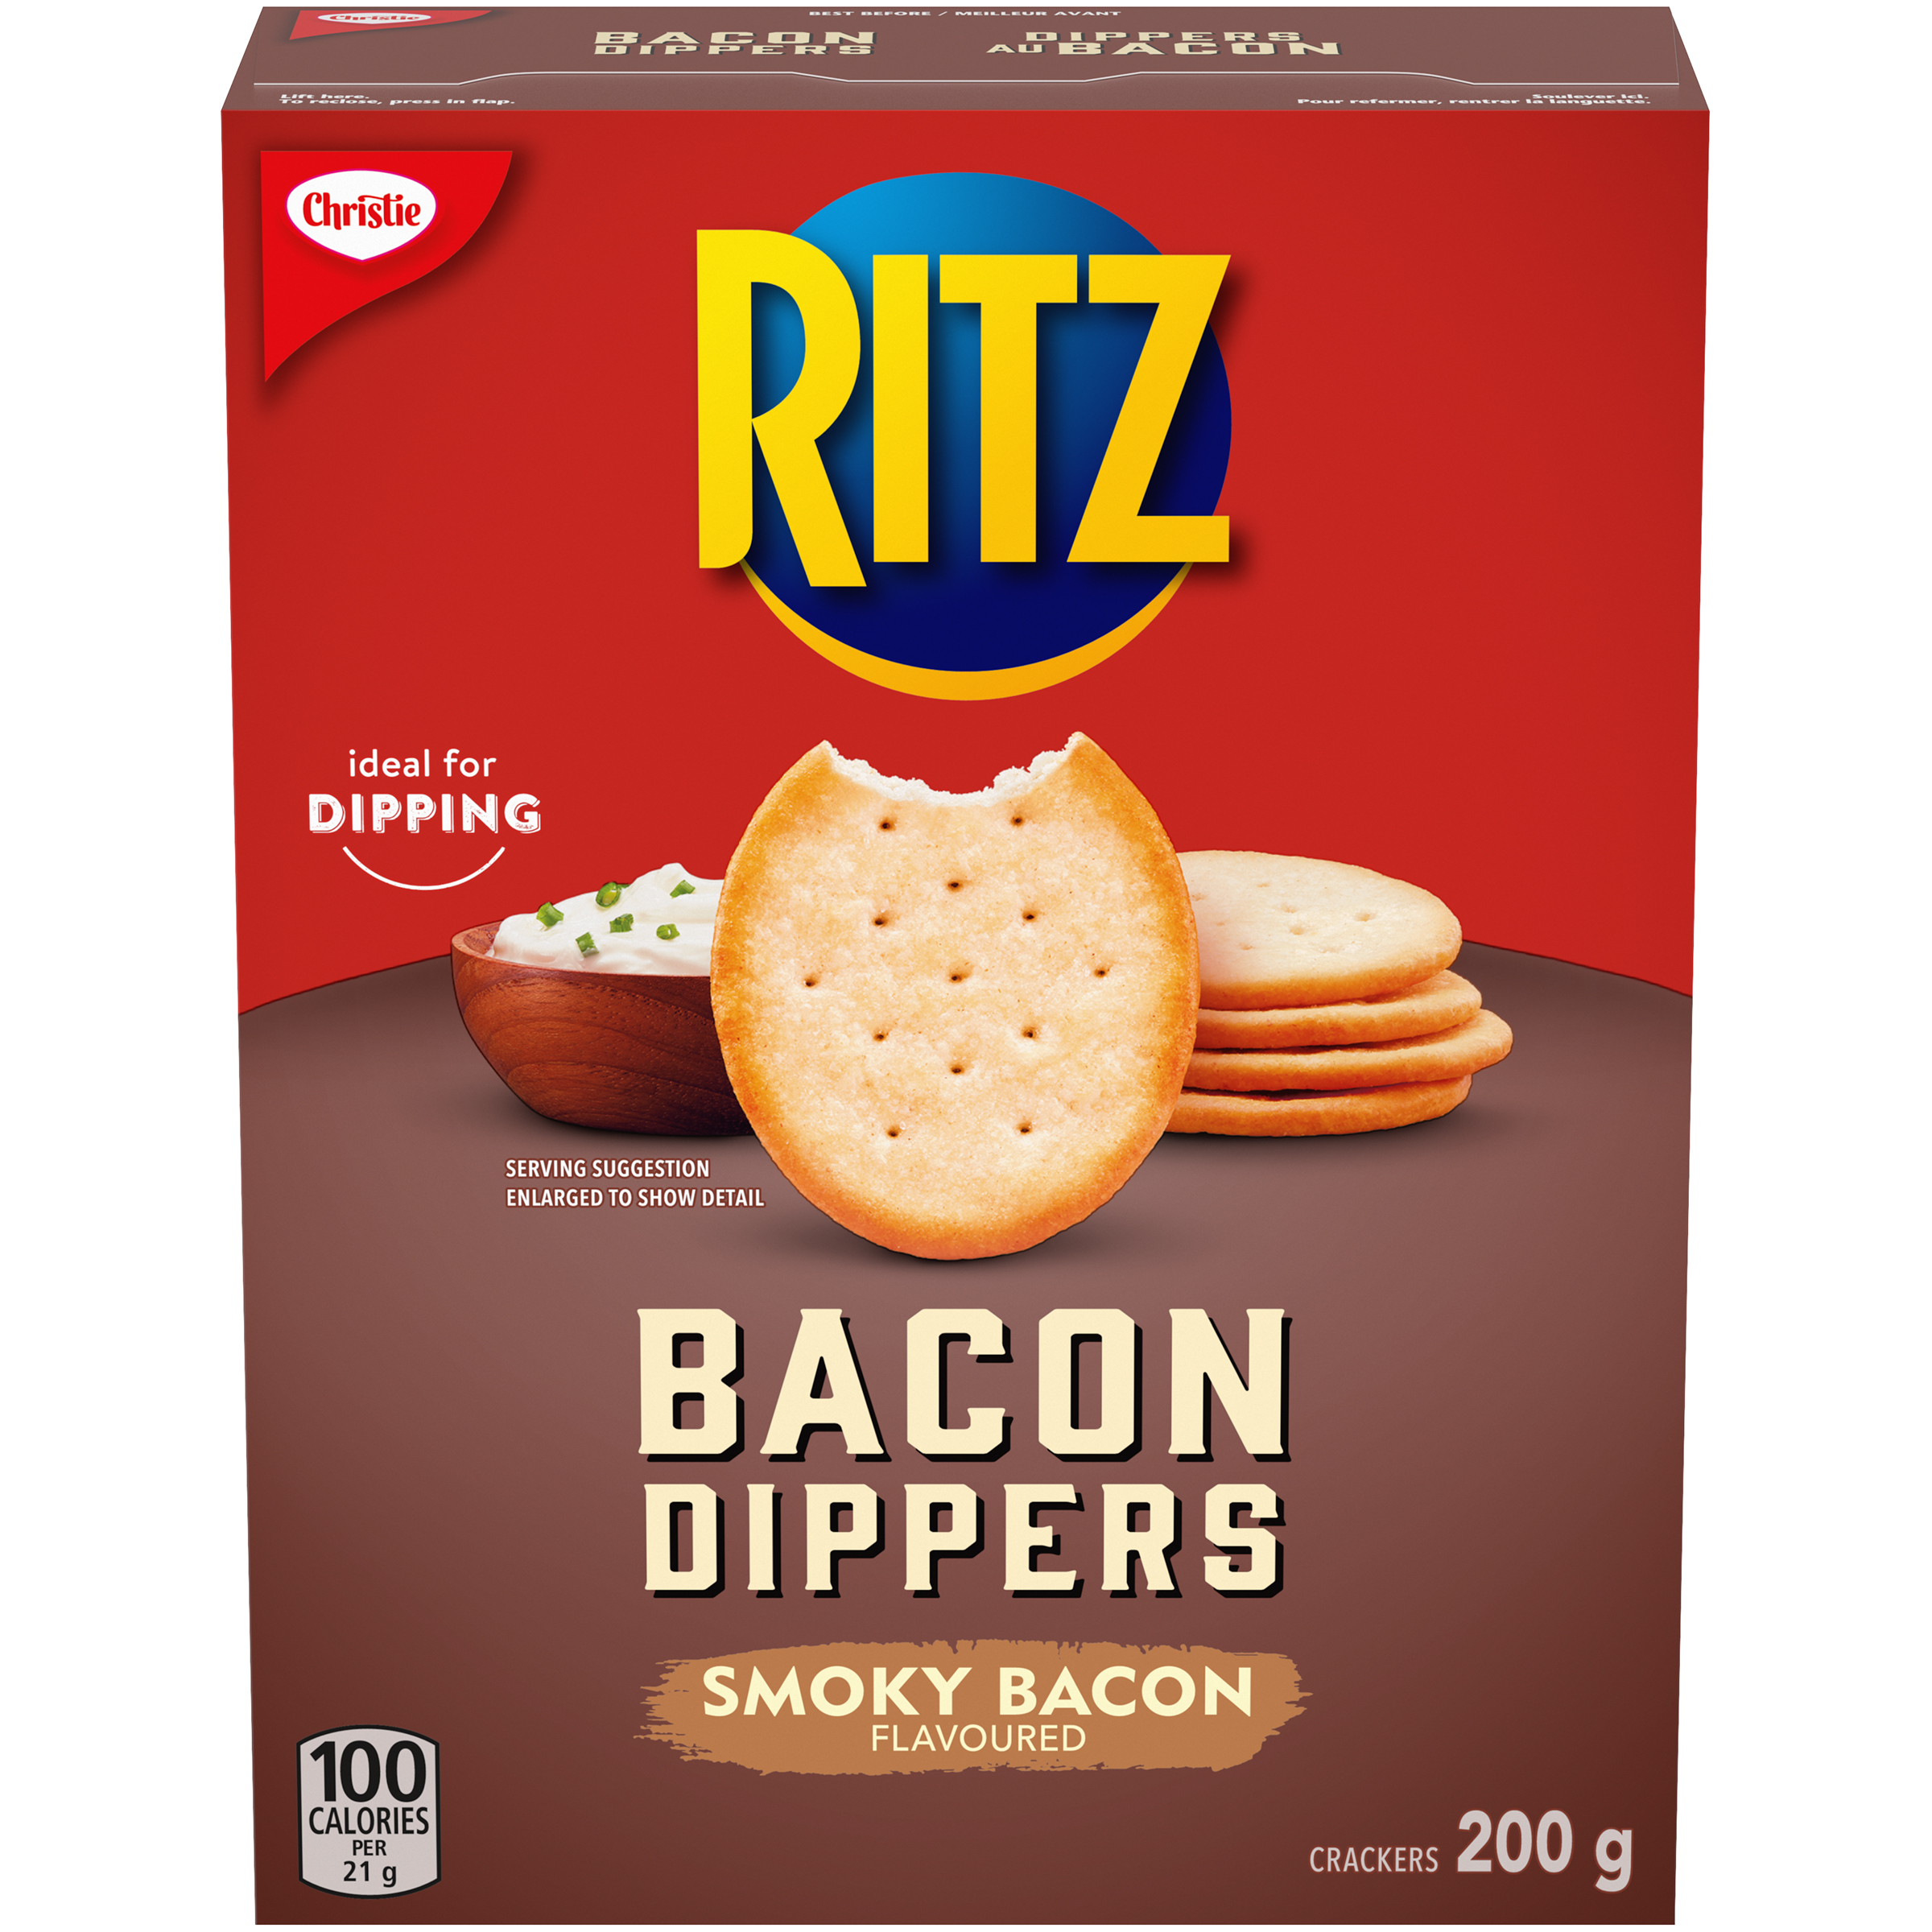 RITZ DIPPERS AU BACON 200G